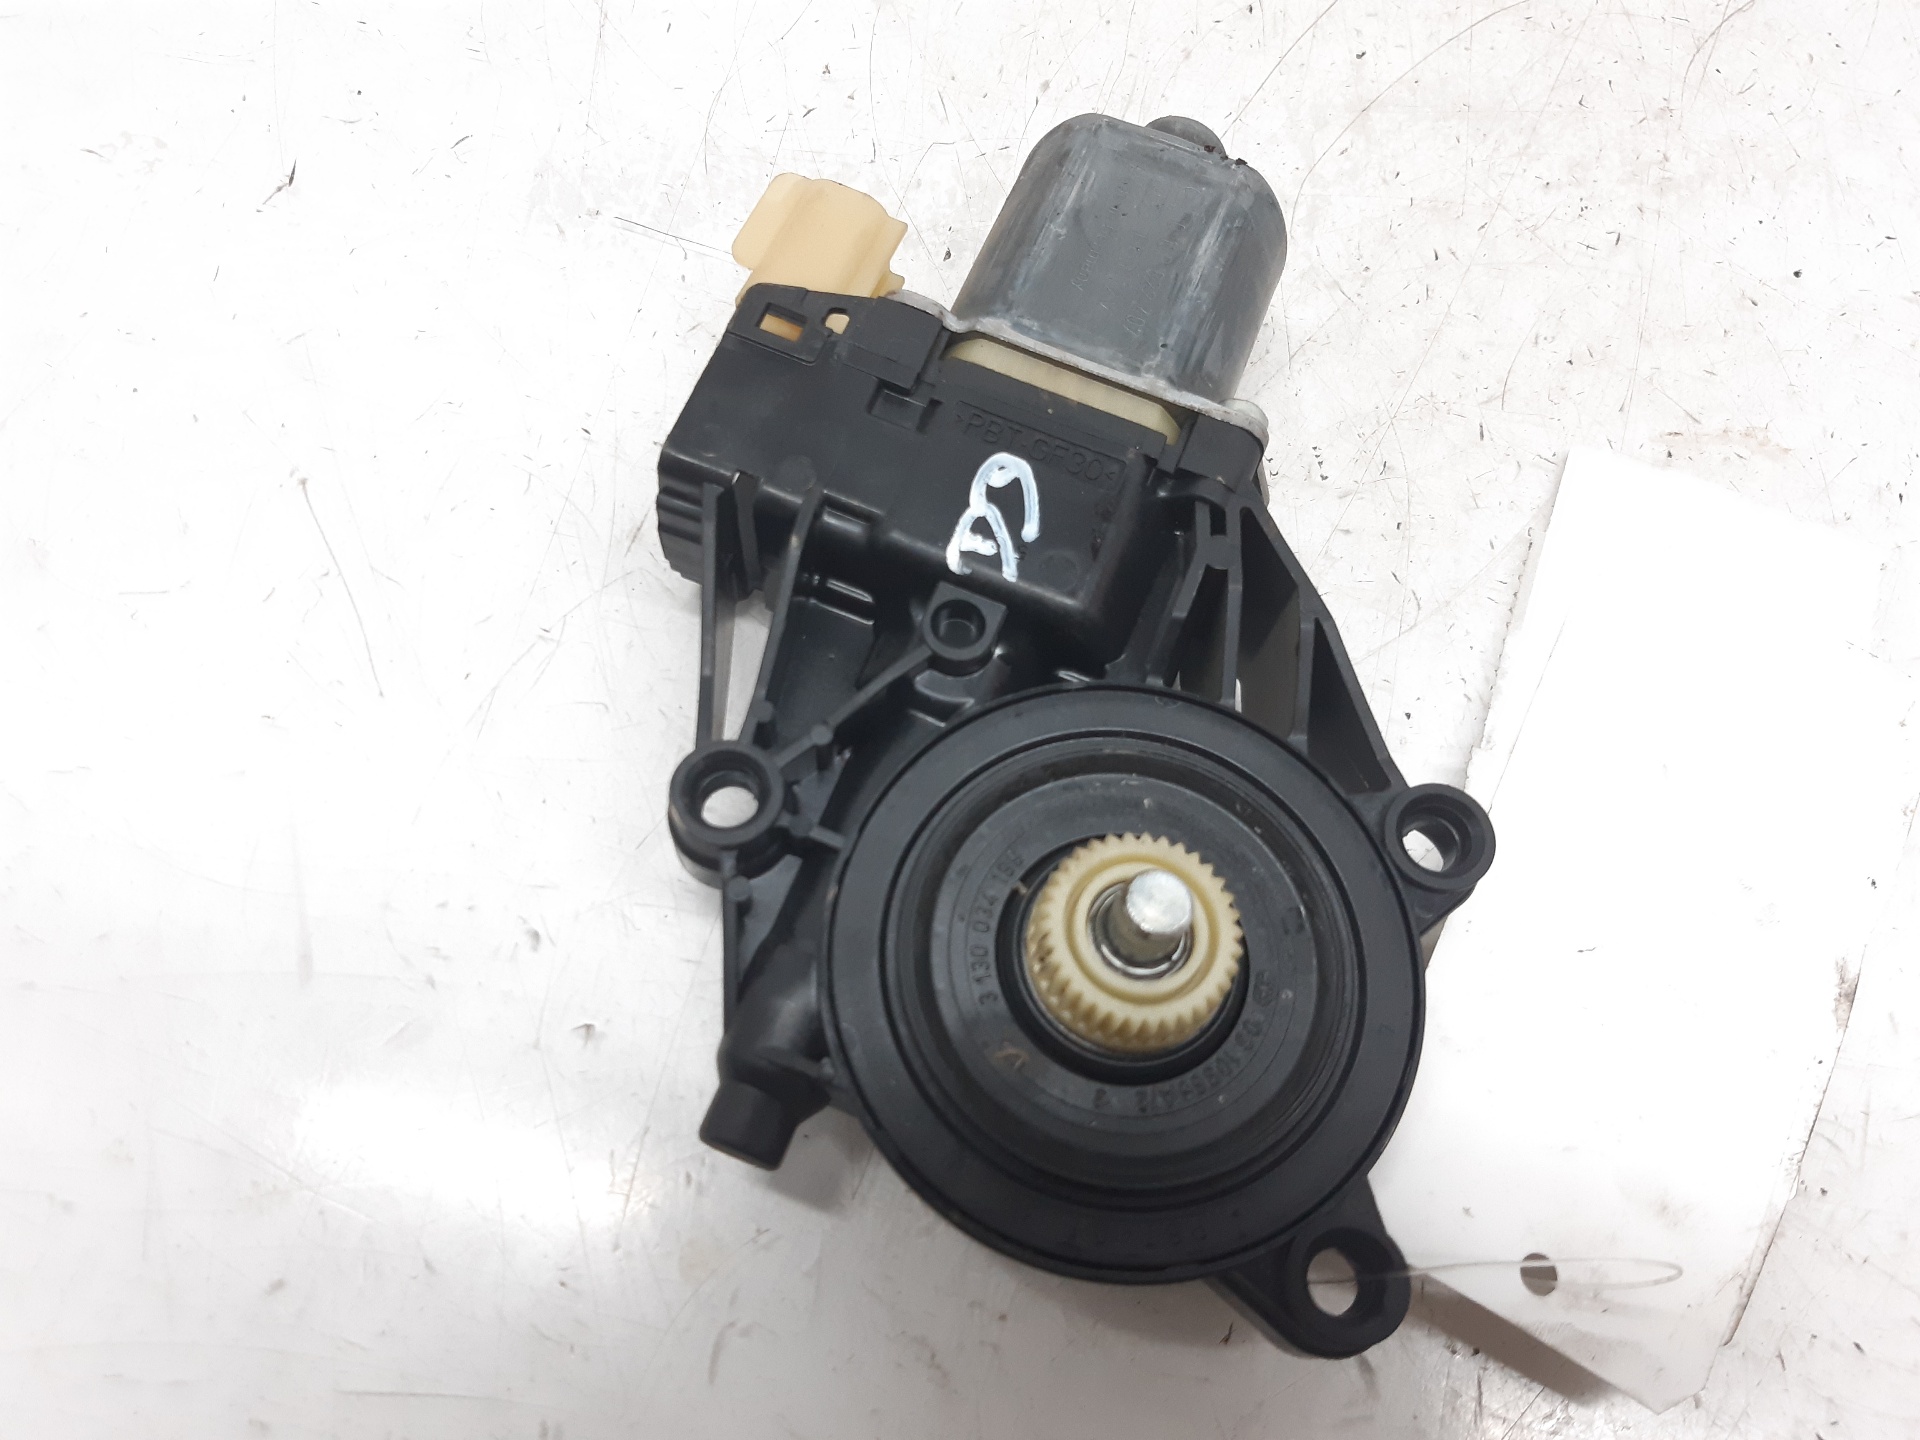 FORD Fiesta 5 generation (2001-2010) Front Right Door Window Control Motor 8A6114553A 18698403